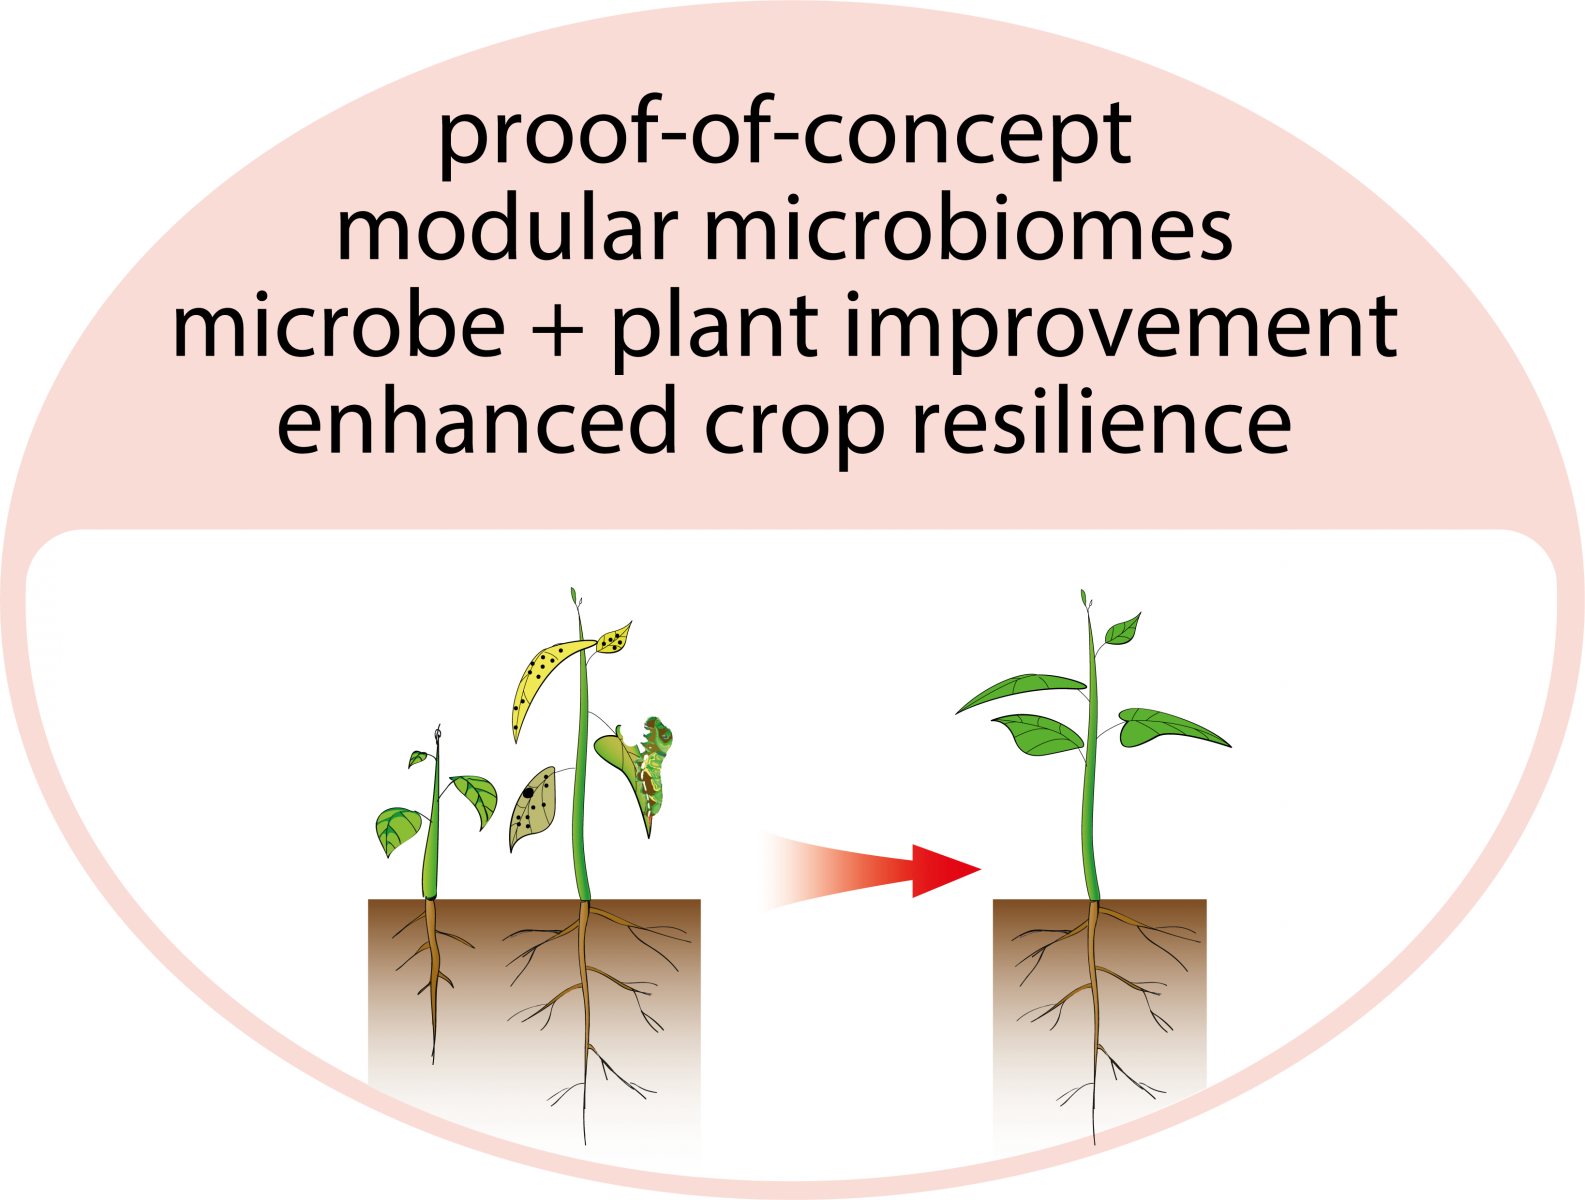 Plant improvement for enhanced crop resilience